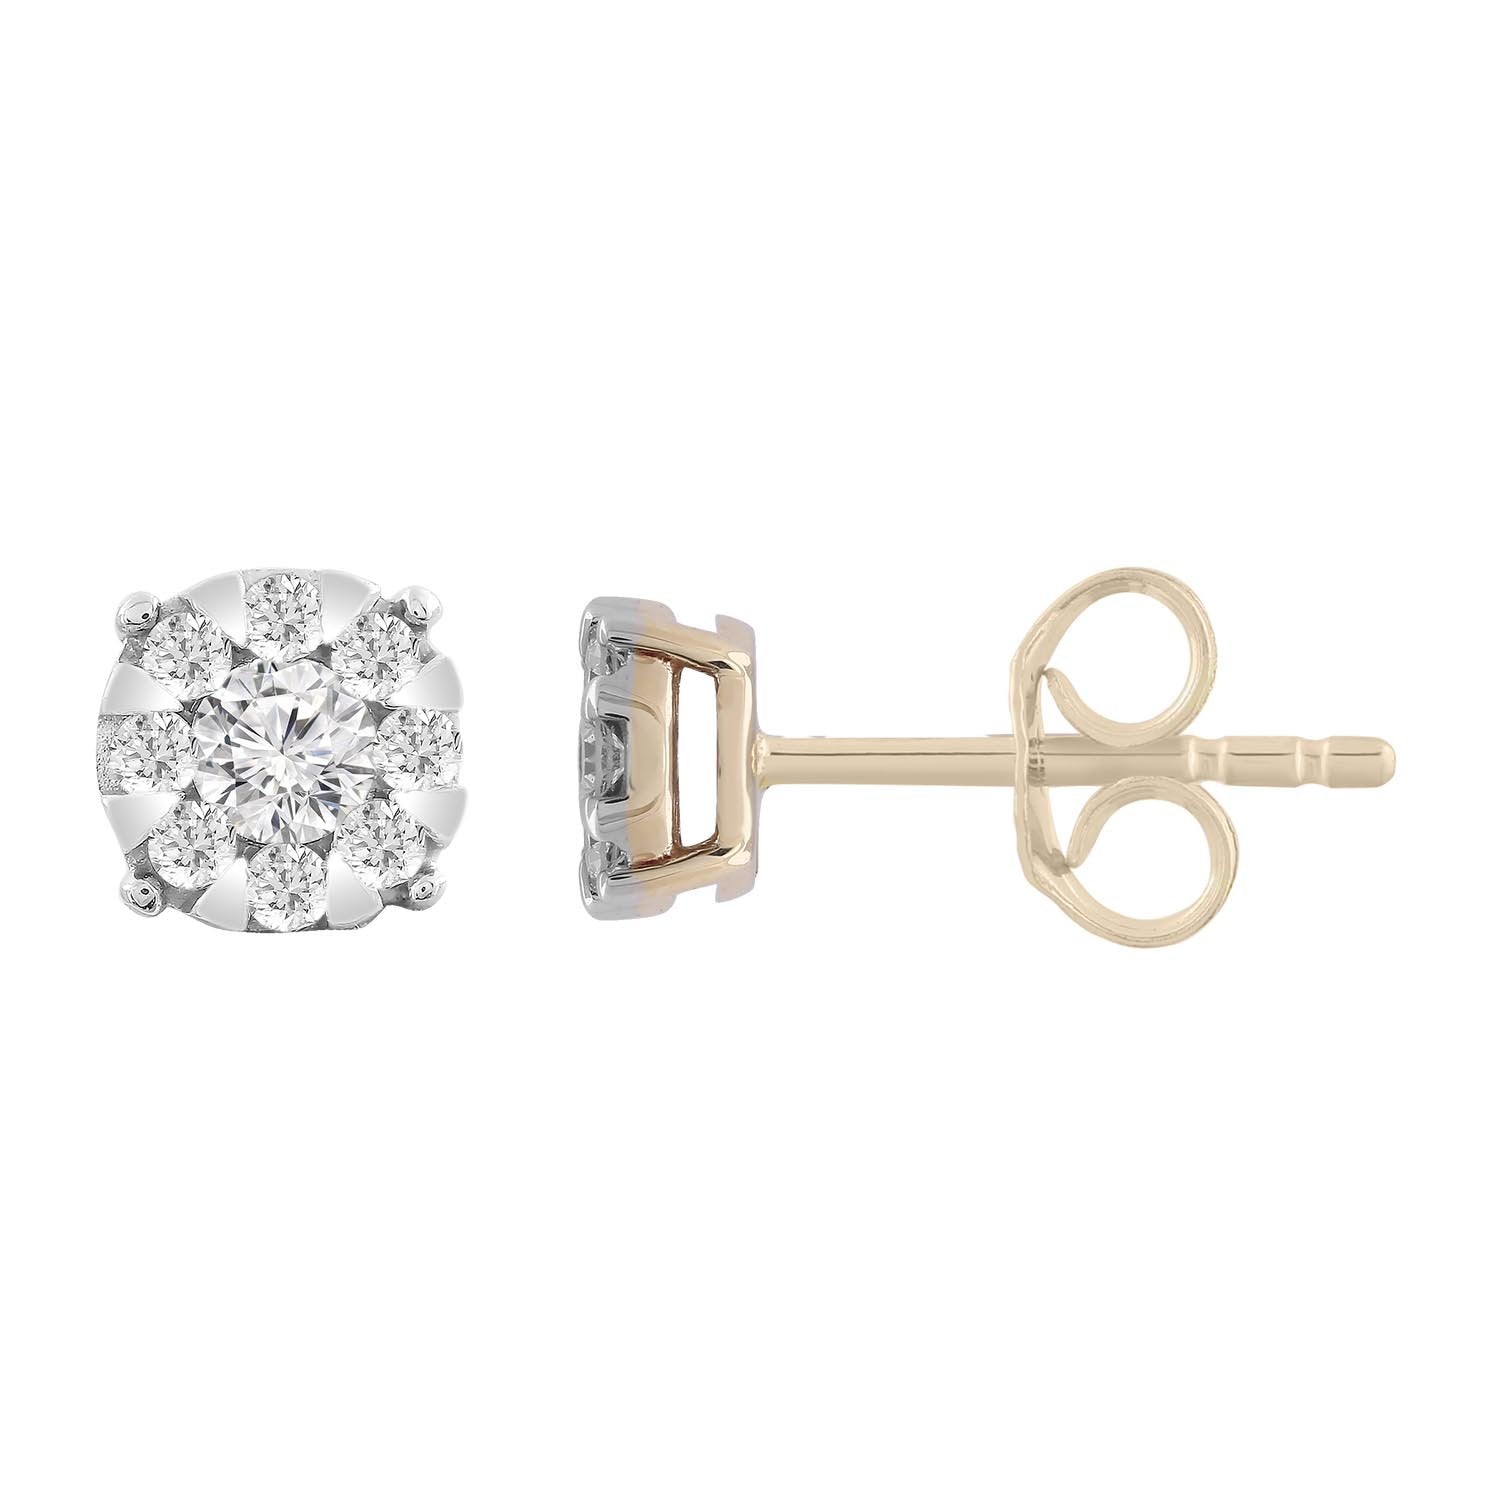 Stud Earrings with 0.33ct Diamonds in 9K Yellow Gold